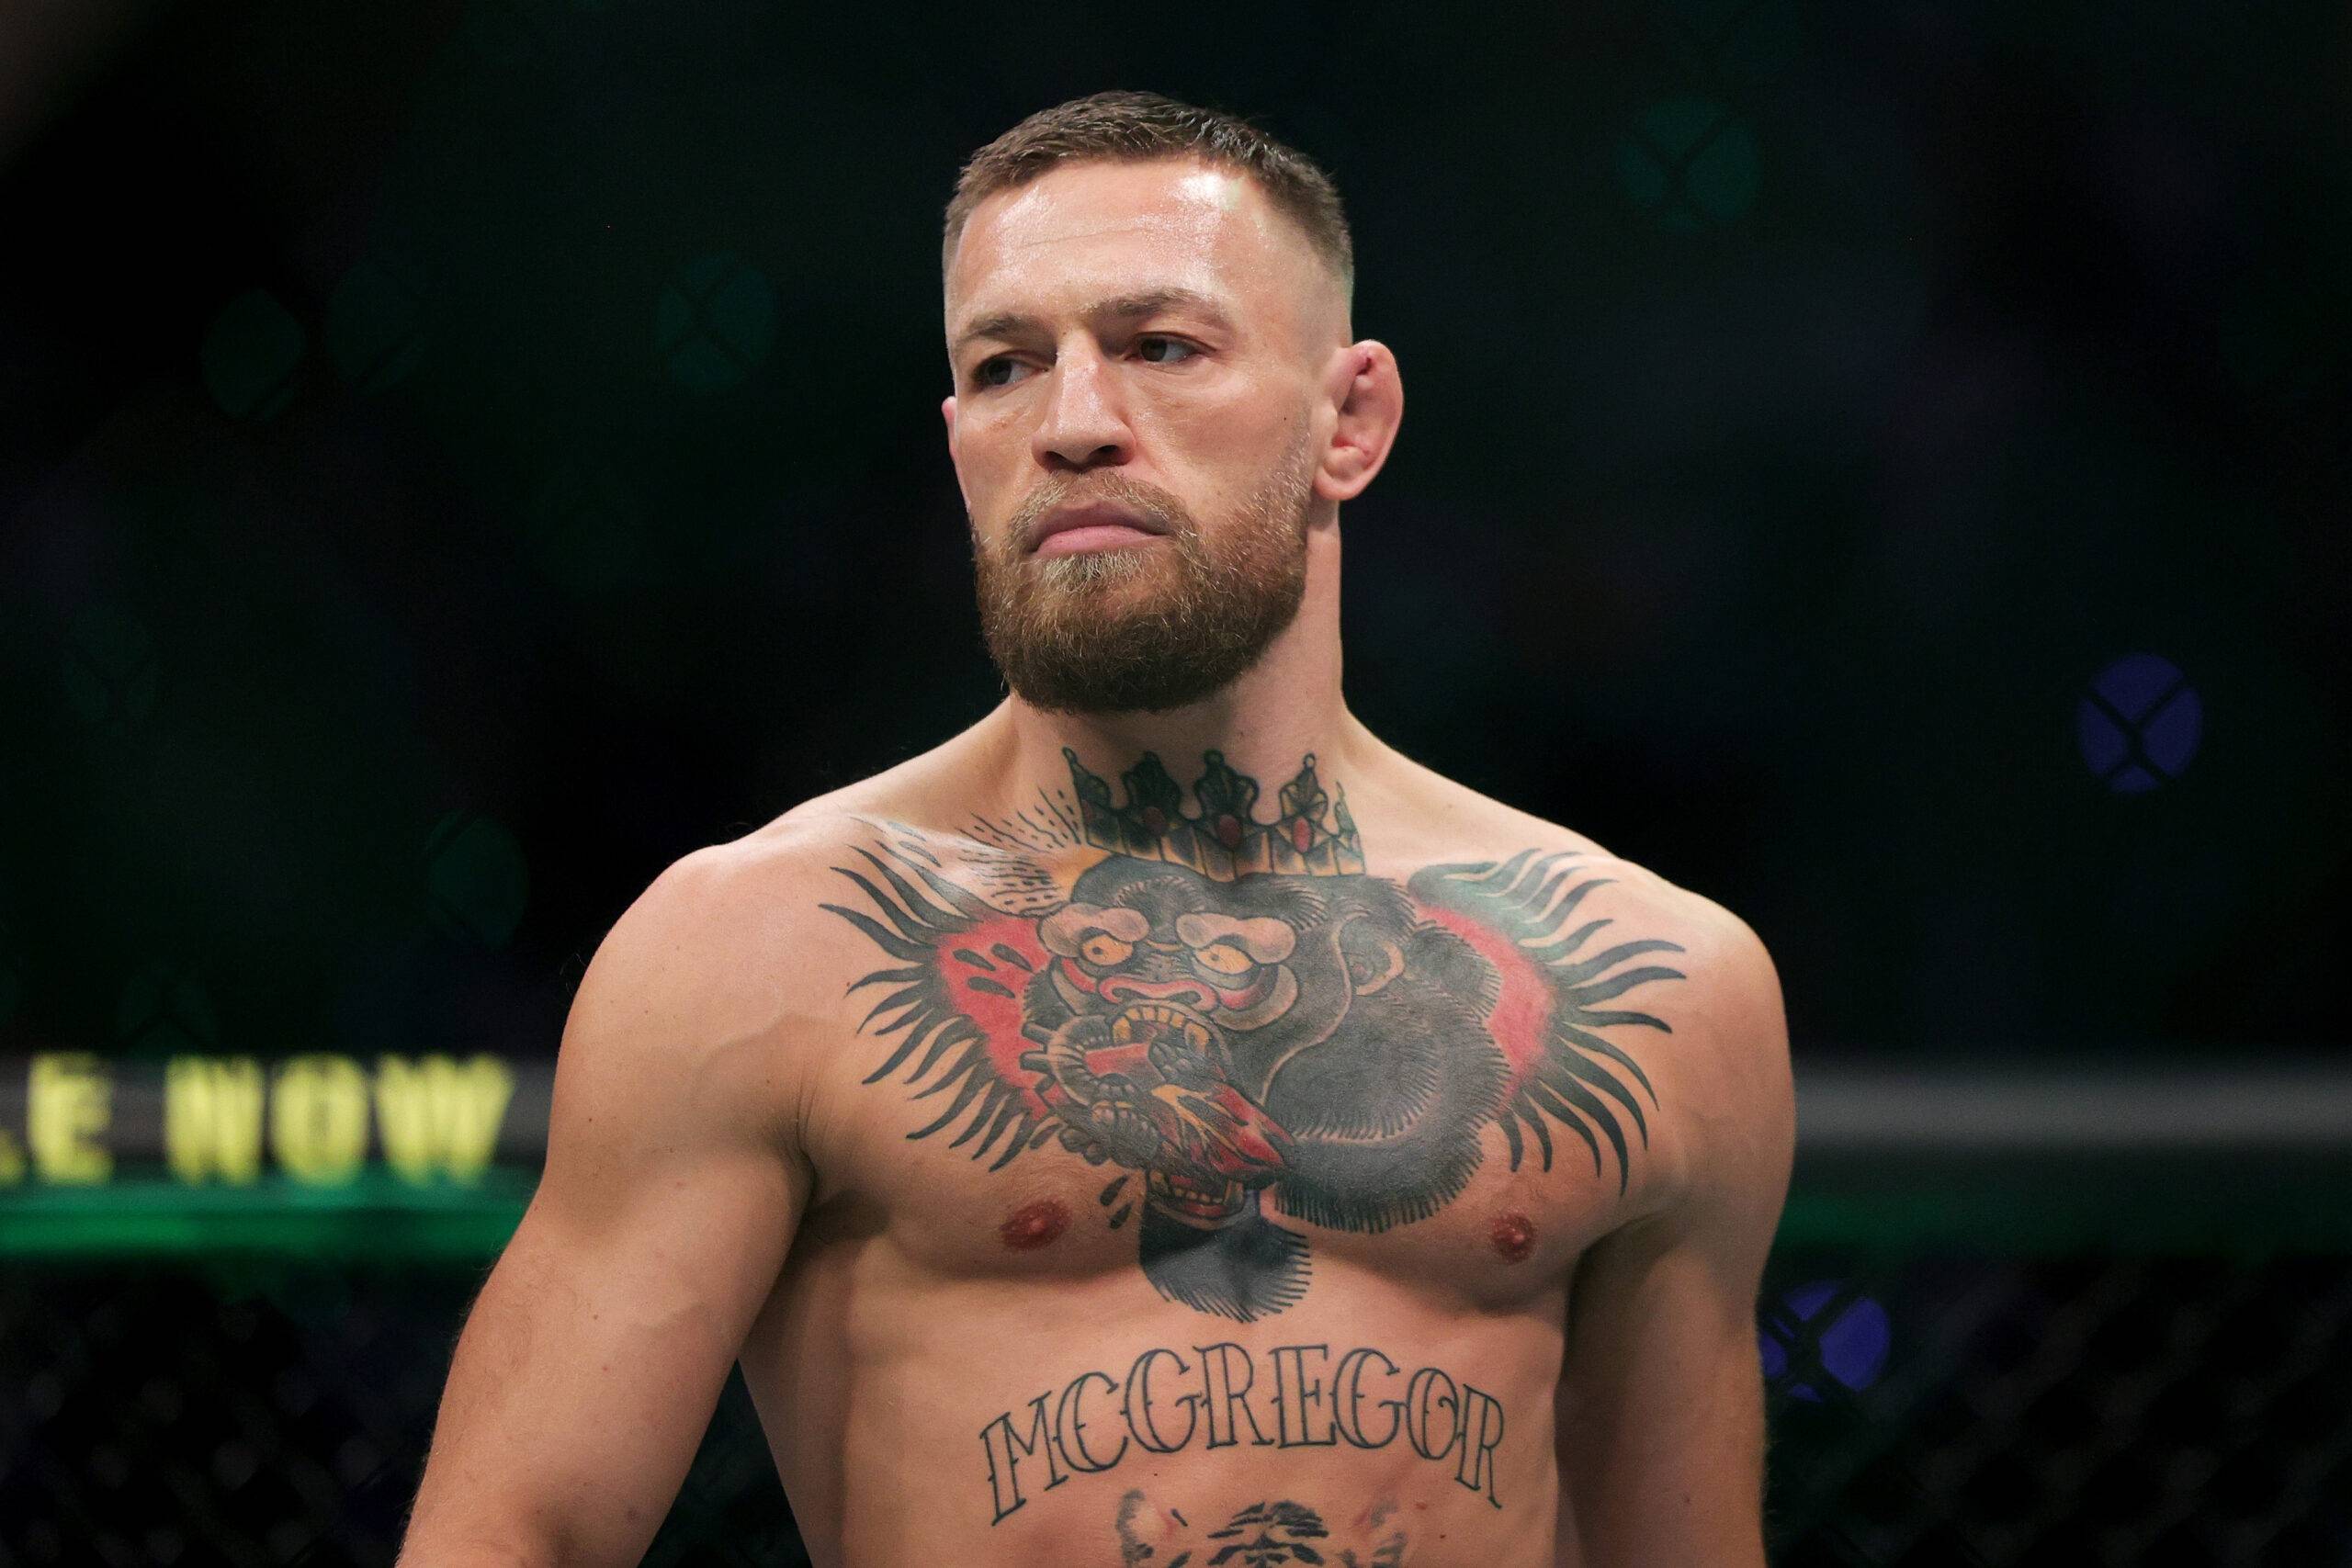 Justin Gaethje has accused Conor McGregor of taking steroids